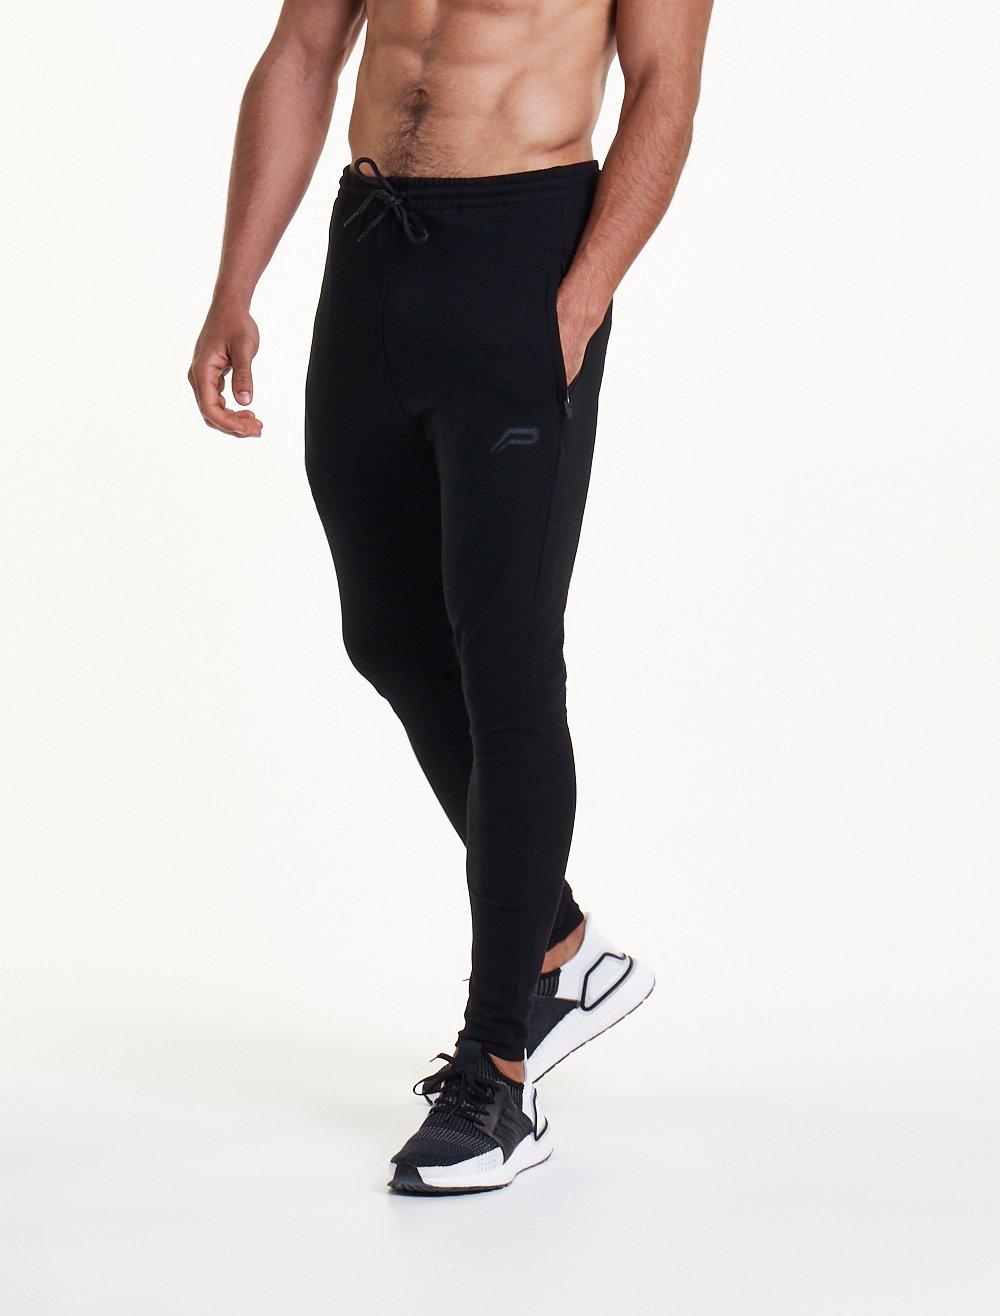 Pro-Fit Tapered Bottoms / Triple Black Pursue Fitness 5